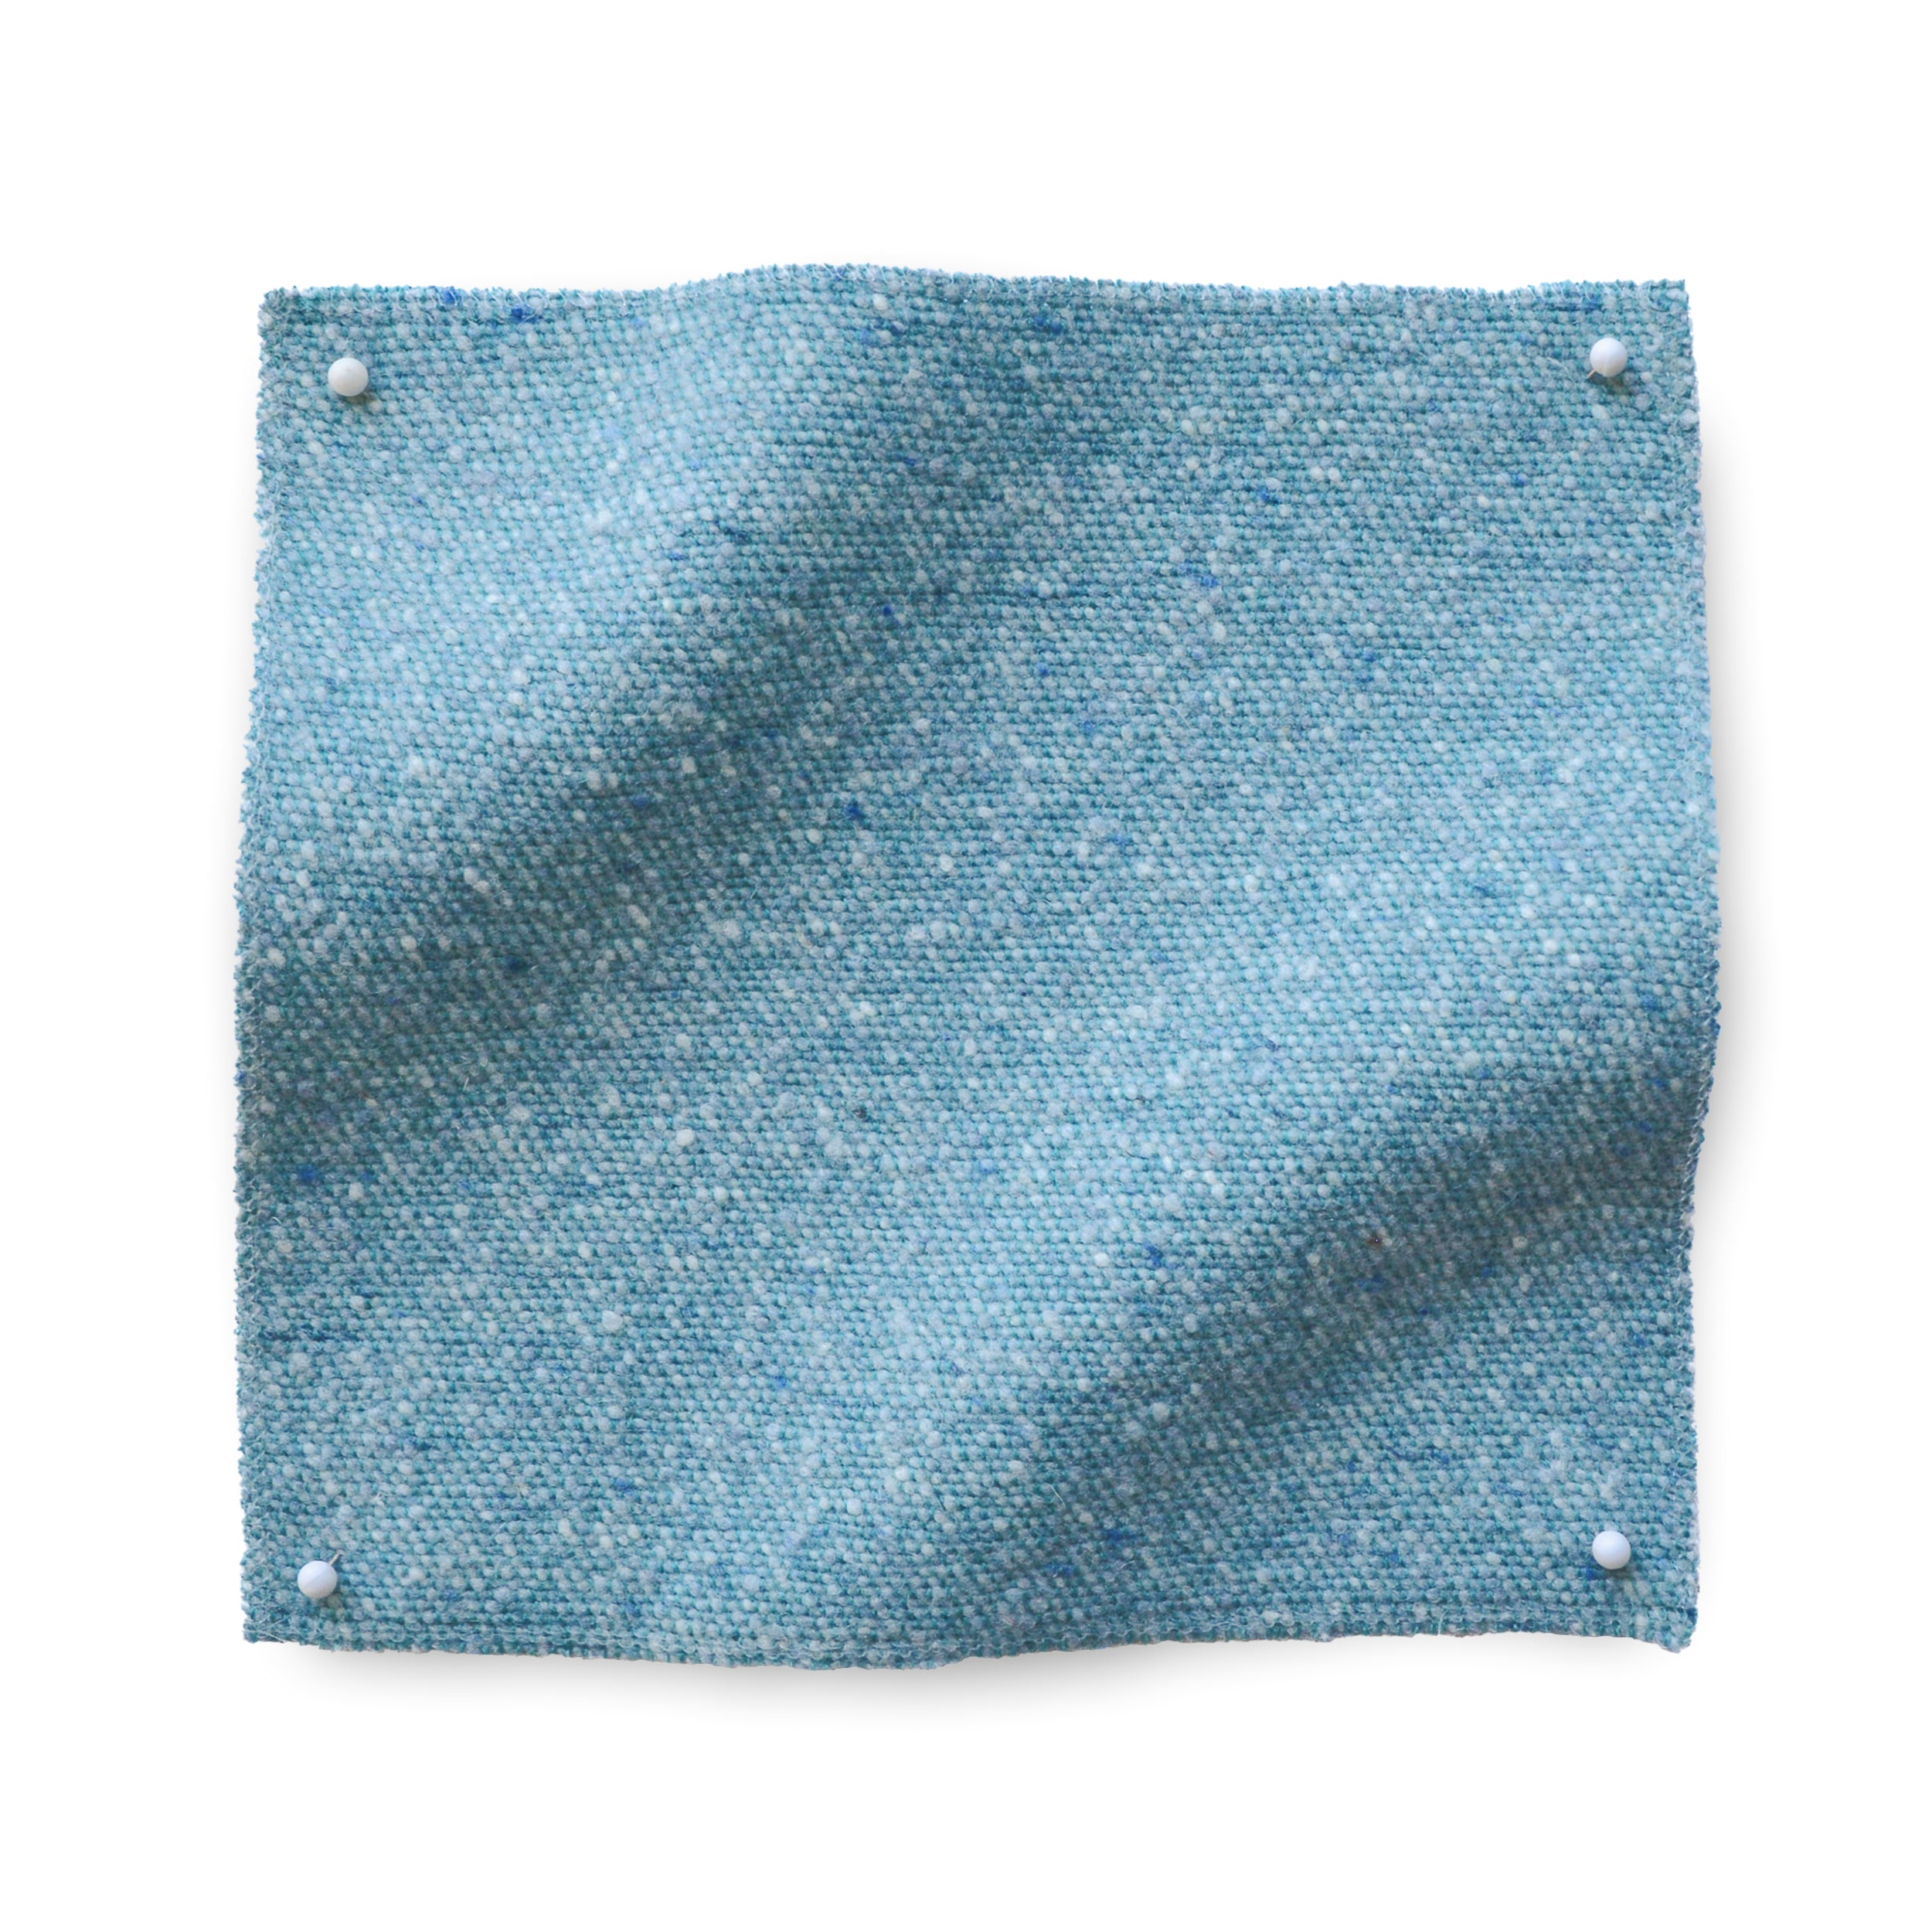 Square fabric swatch of heathered wool in a light blue colorway.